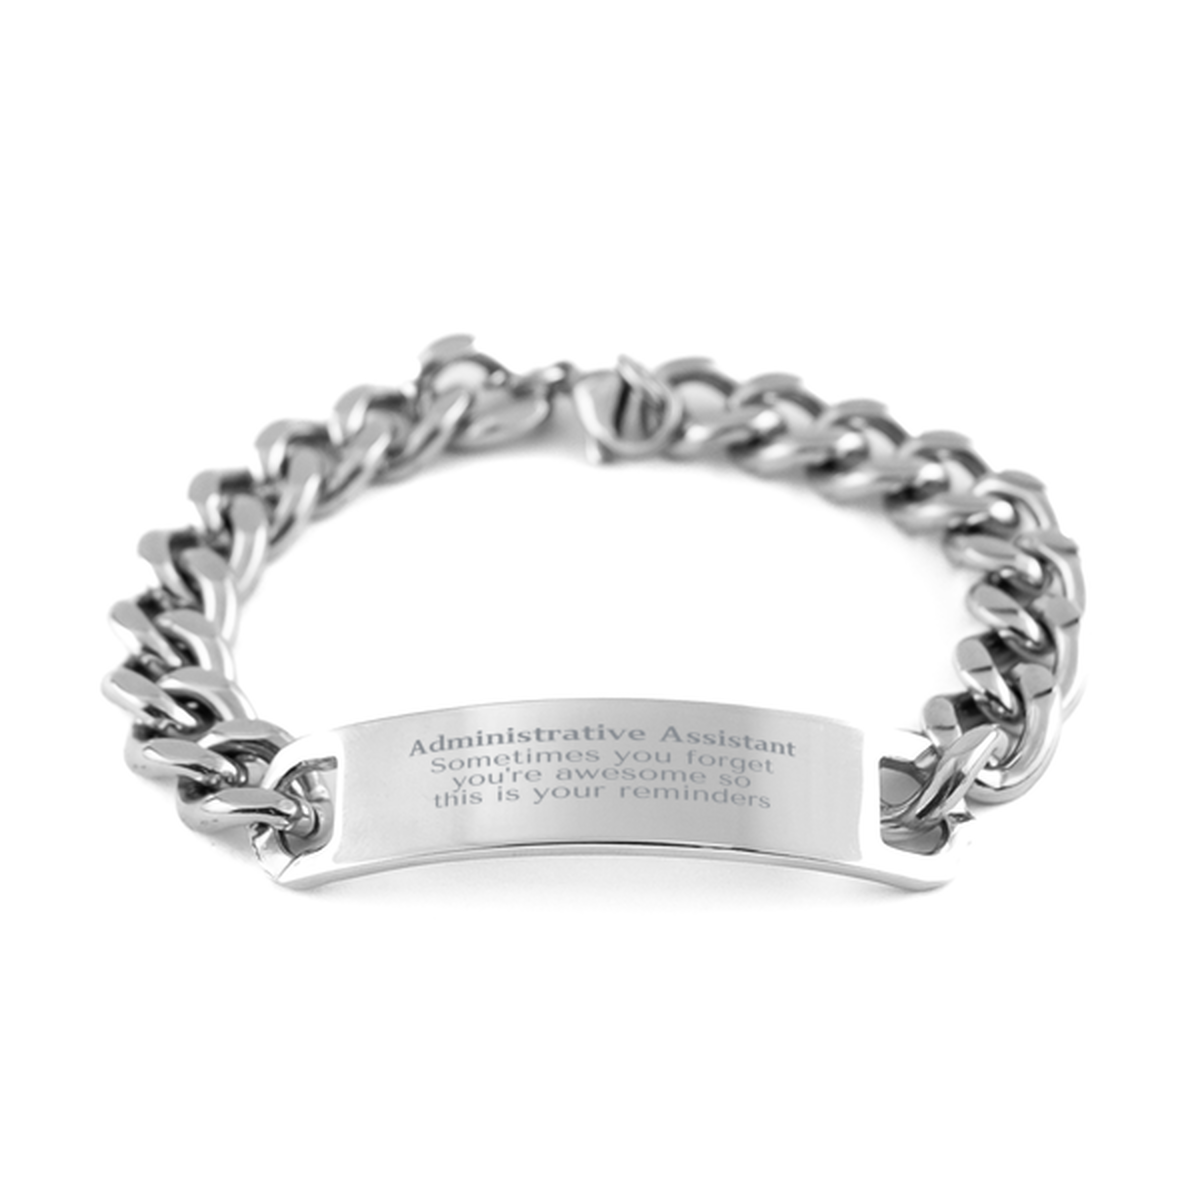 Sentimental Administrative Assistant Cuban Chain Stainless Steel Bracelet, Administrative Assistant Sometimes you forget you're awesome so this is your reminders, Graduation Christmas Birthday Gifts for Administrative Assistant, Men, Women, Coworkers